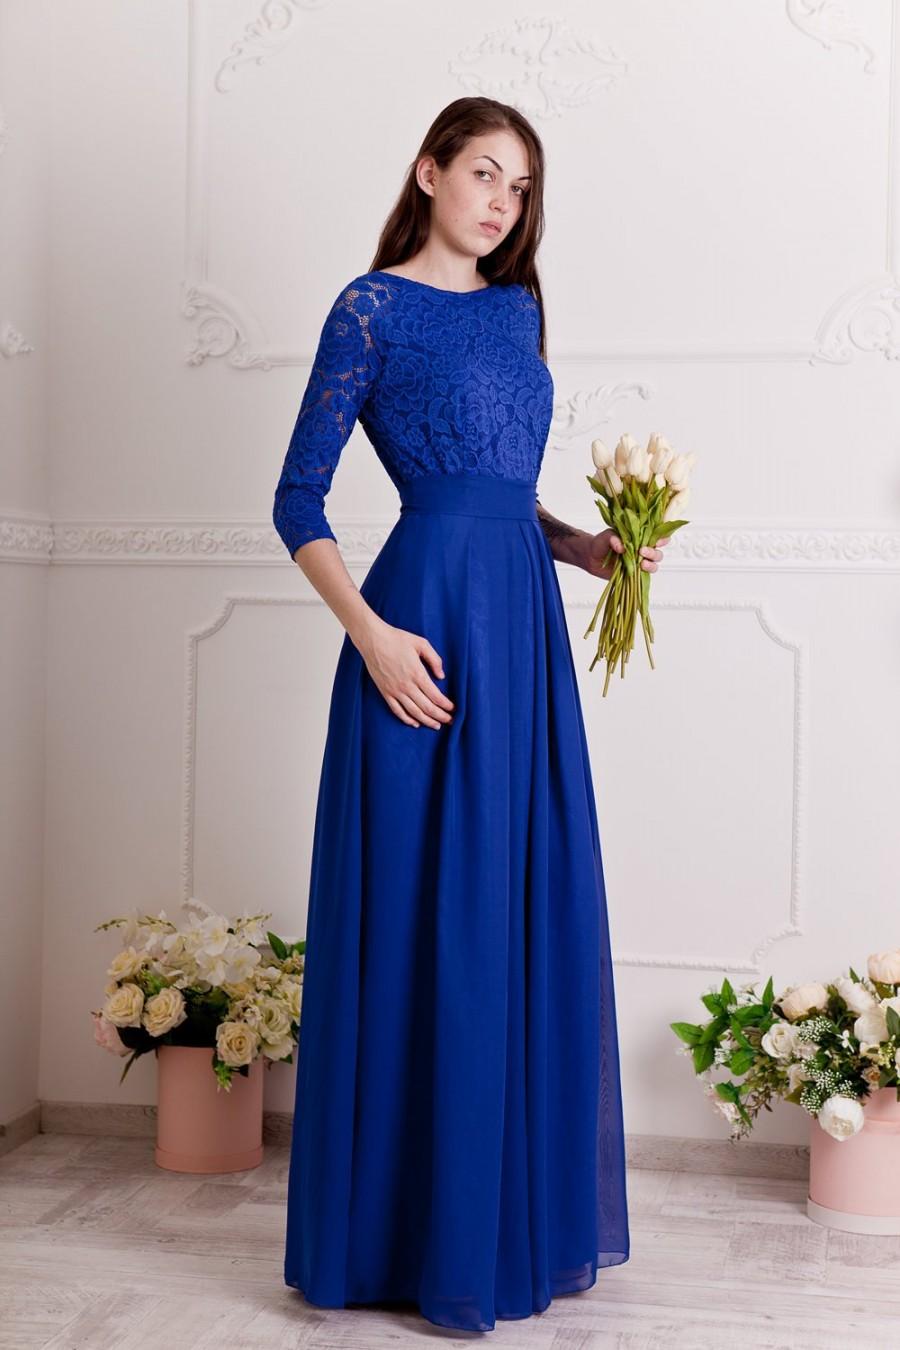 Mariage - Cobalt blue bridesmaid dress long. Floral lace formal gown with sleeves. Modest evening dress plus size.Blue mother of the groom dress